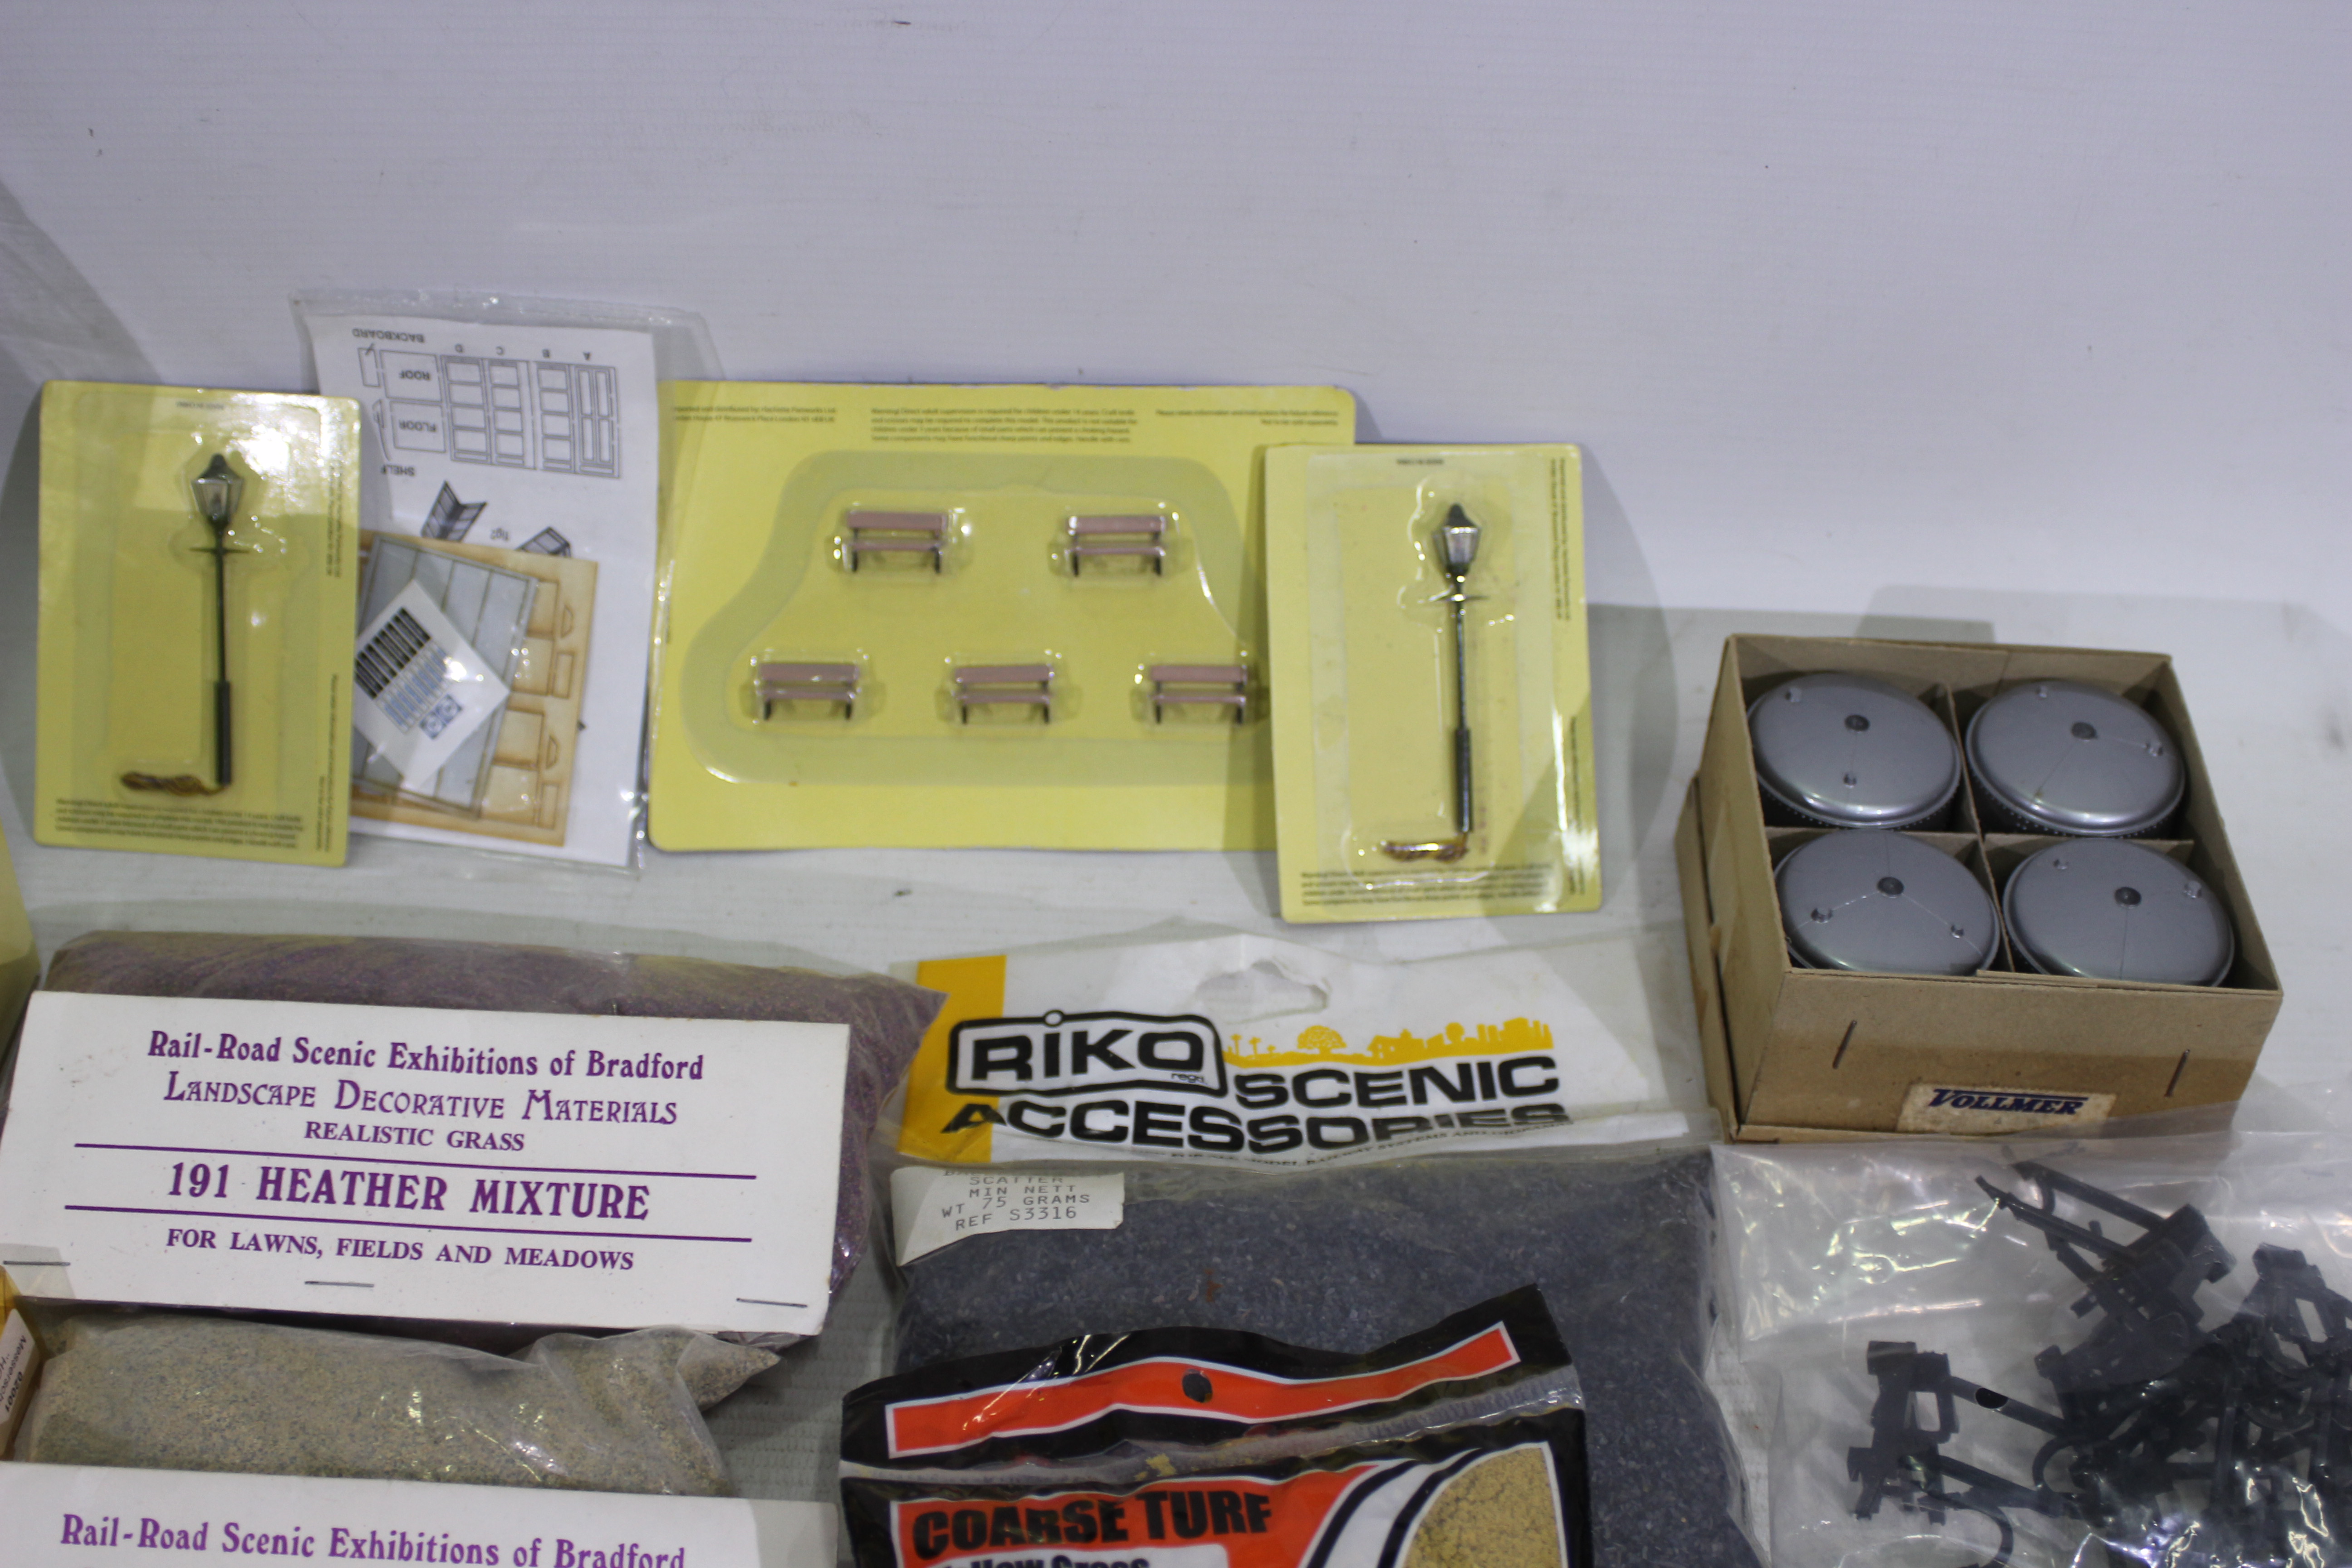 Vollmer - Hachette - Tomar - Others - A quantity of scenic accessories and layout parts in various - Image 3 of 7